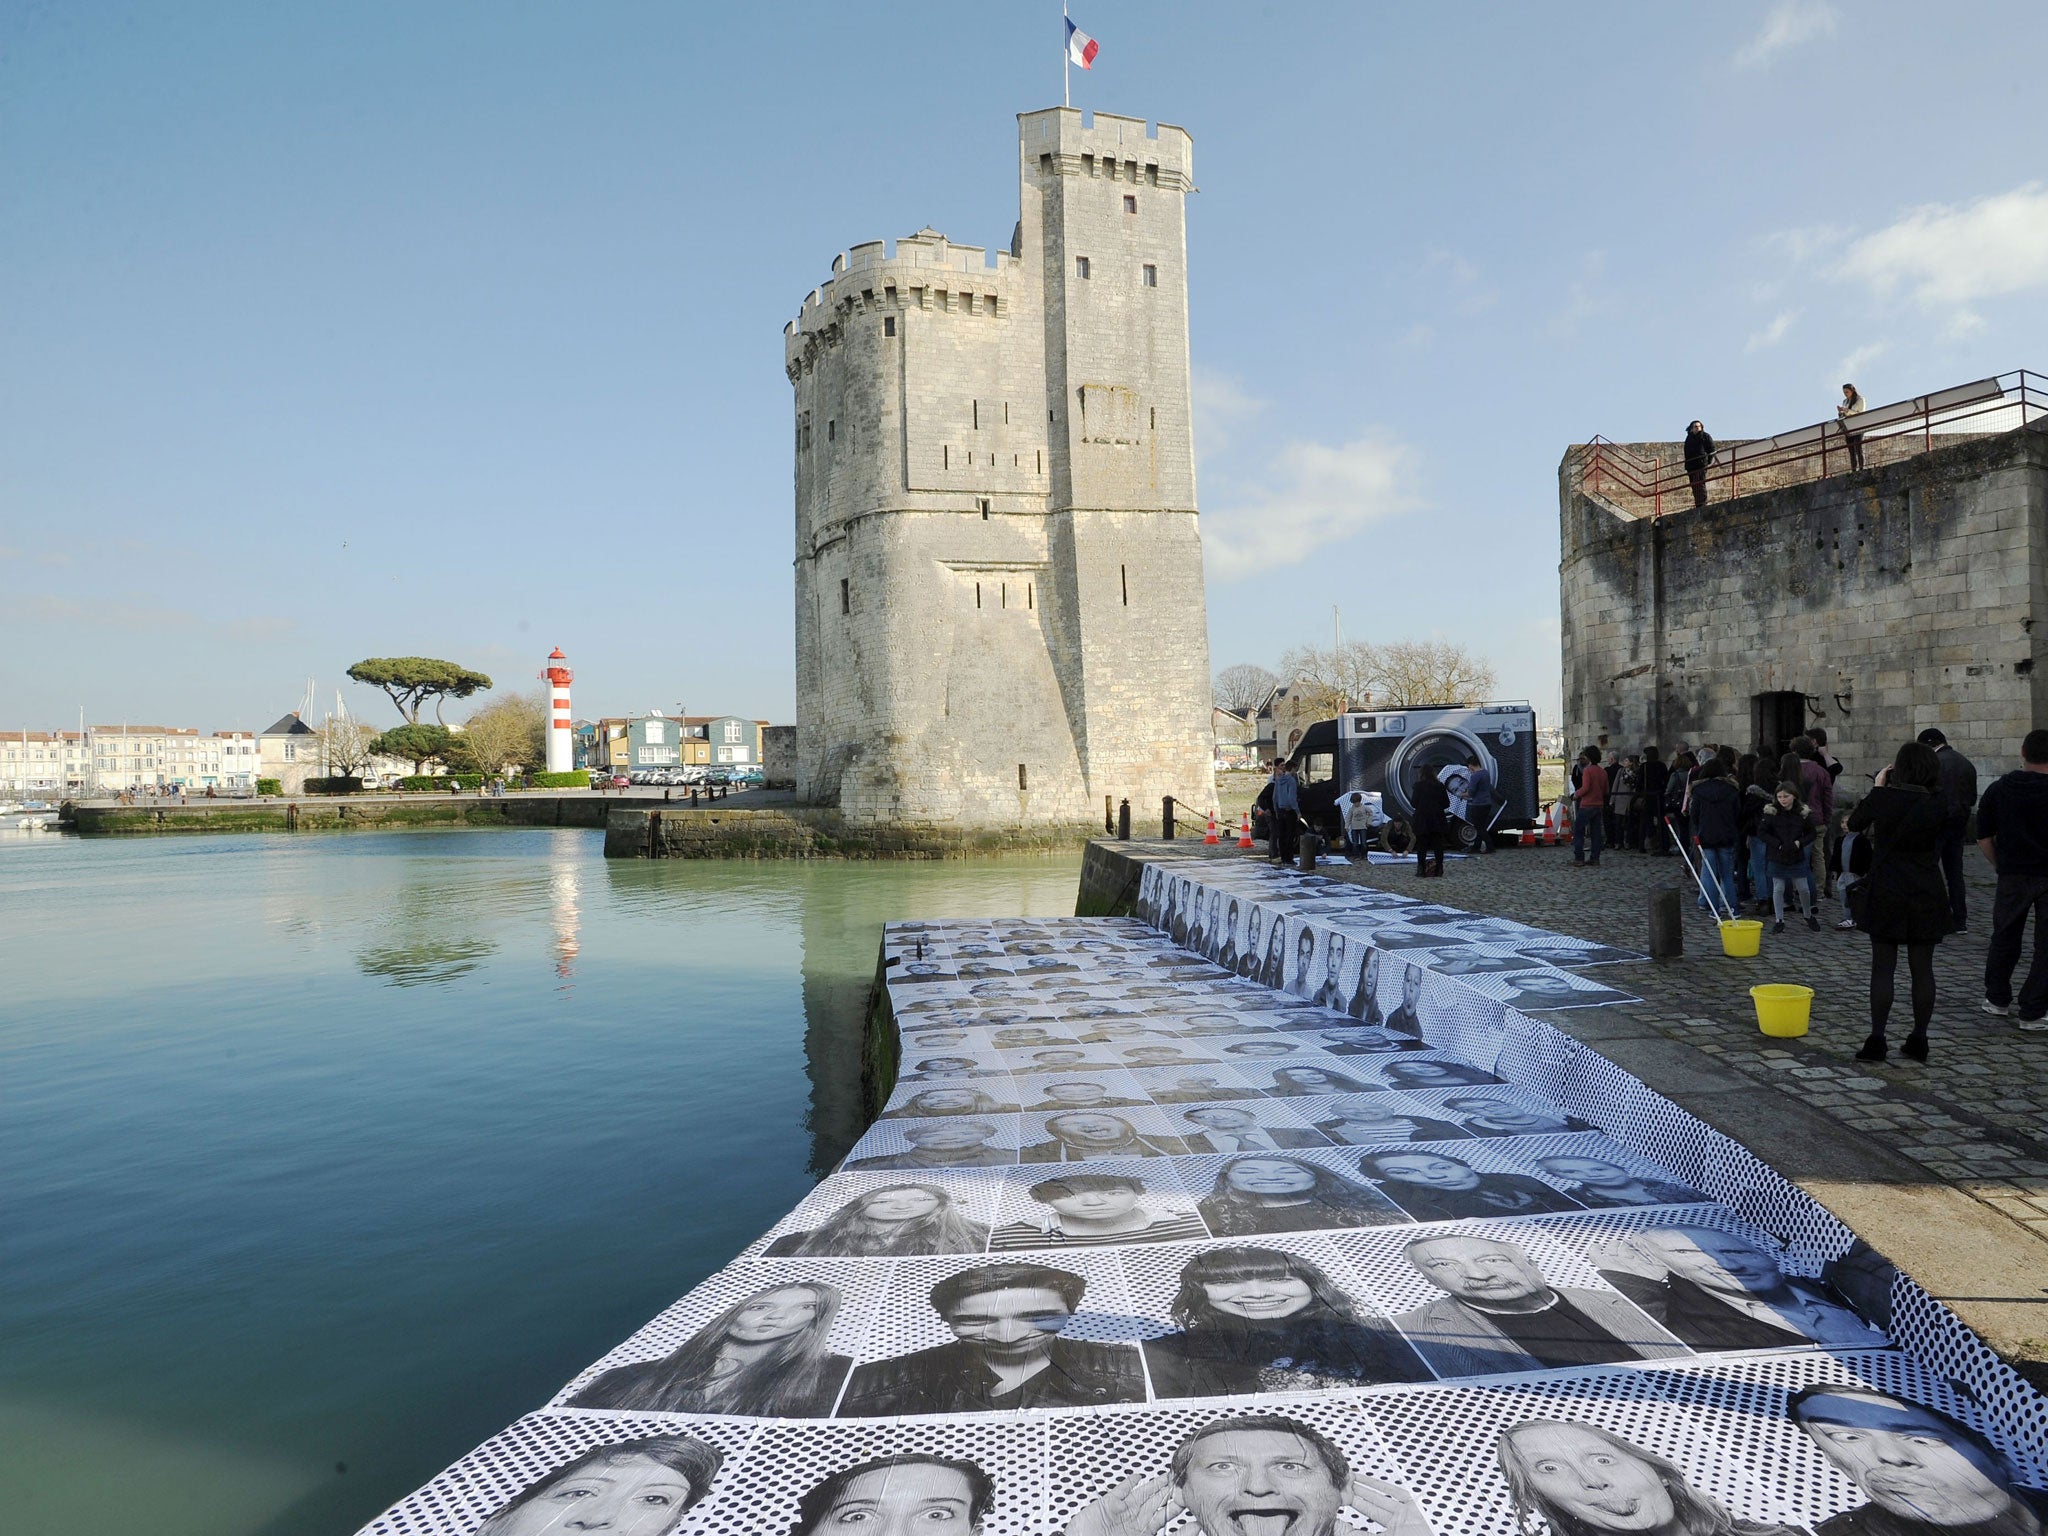 The portraits are also displayed on a harbour's embankment